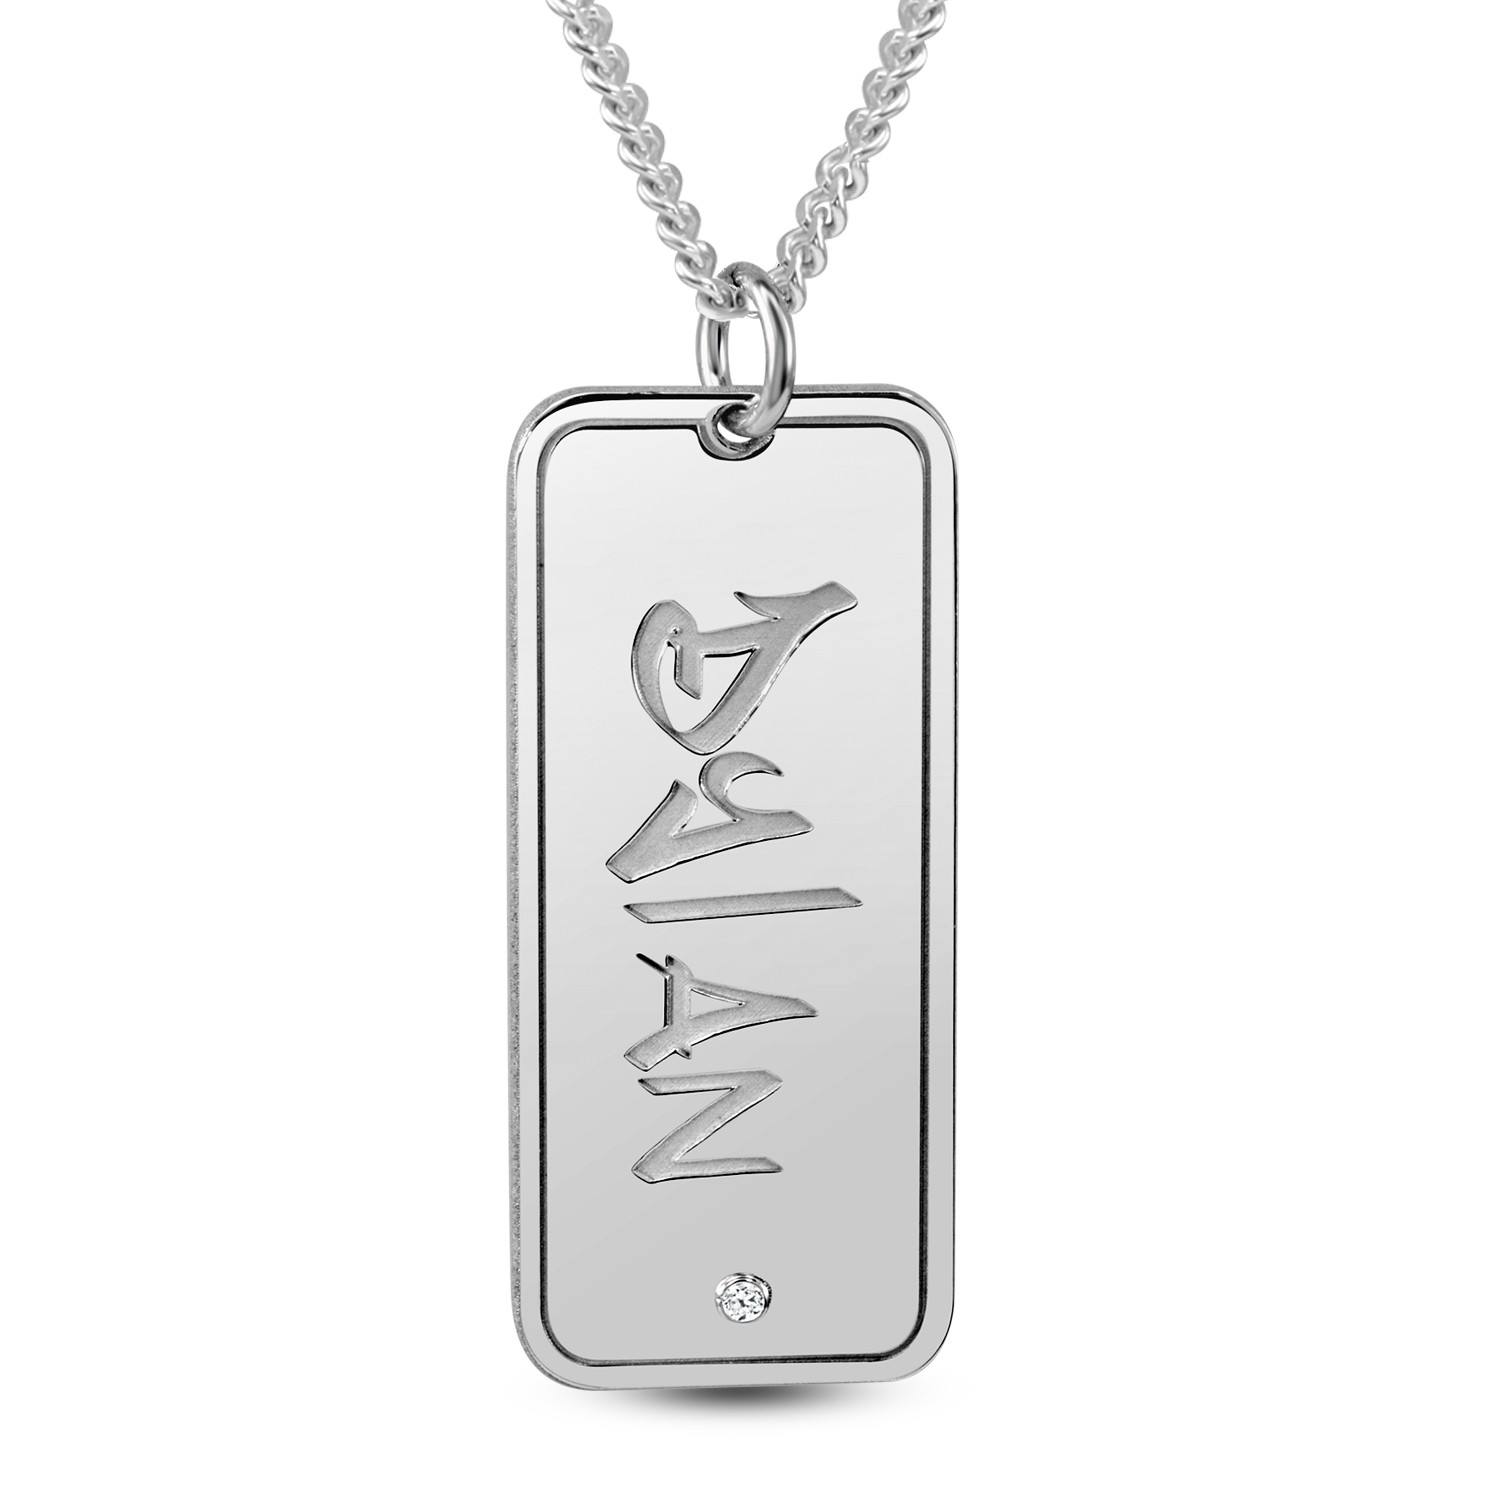 Men's 1/10 CT. T.W. Black Diamond Dog Tag Pendant in Stainless Steel and  Carbon Fiber with Black IP - 24